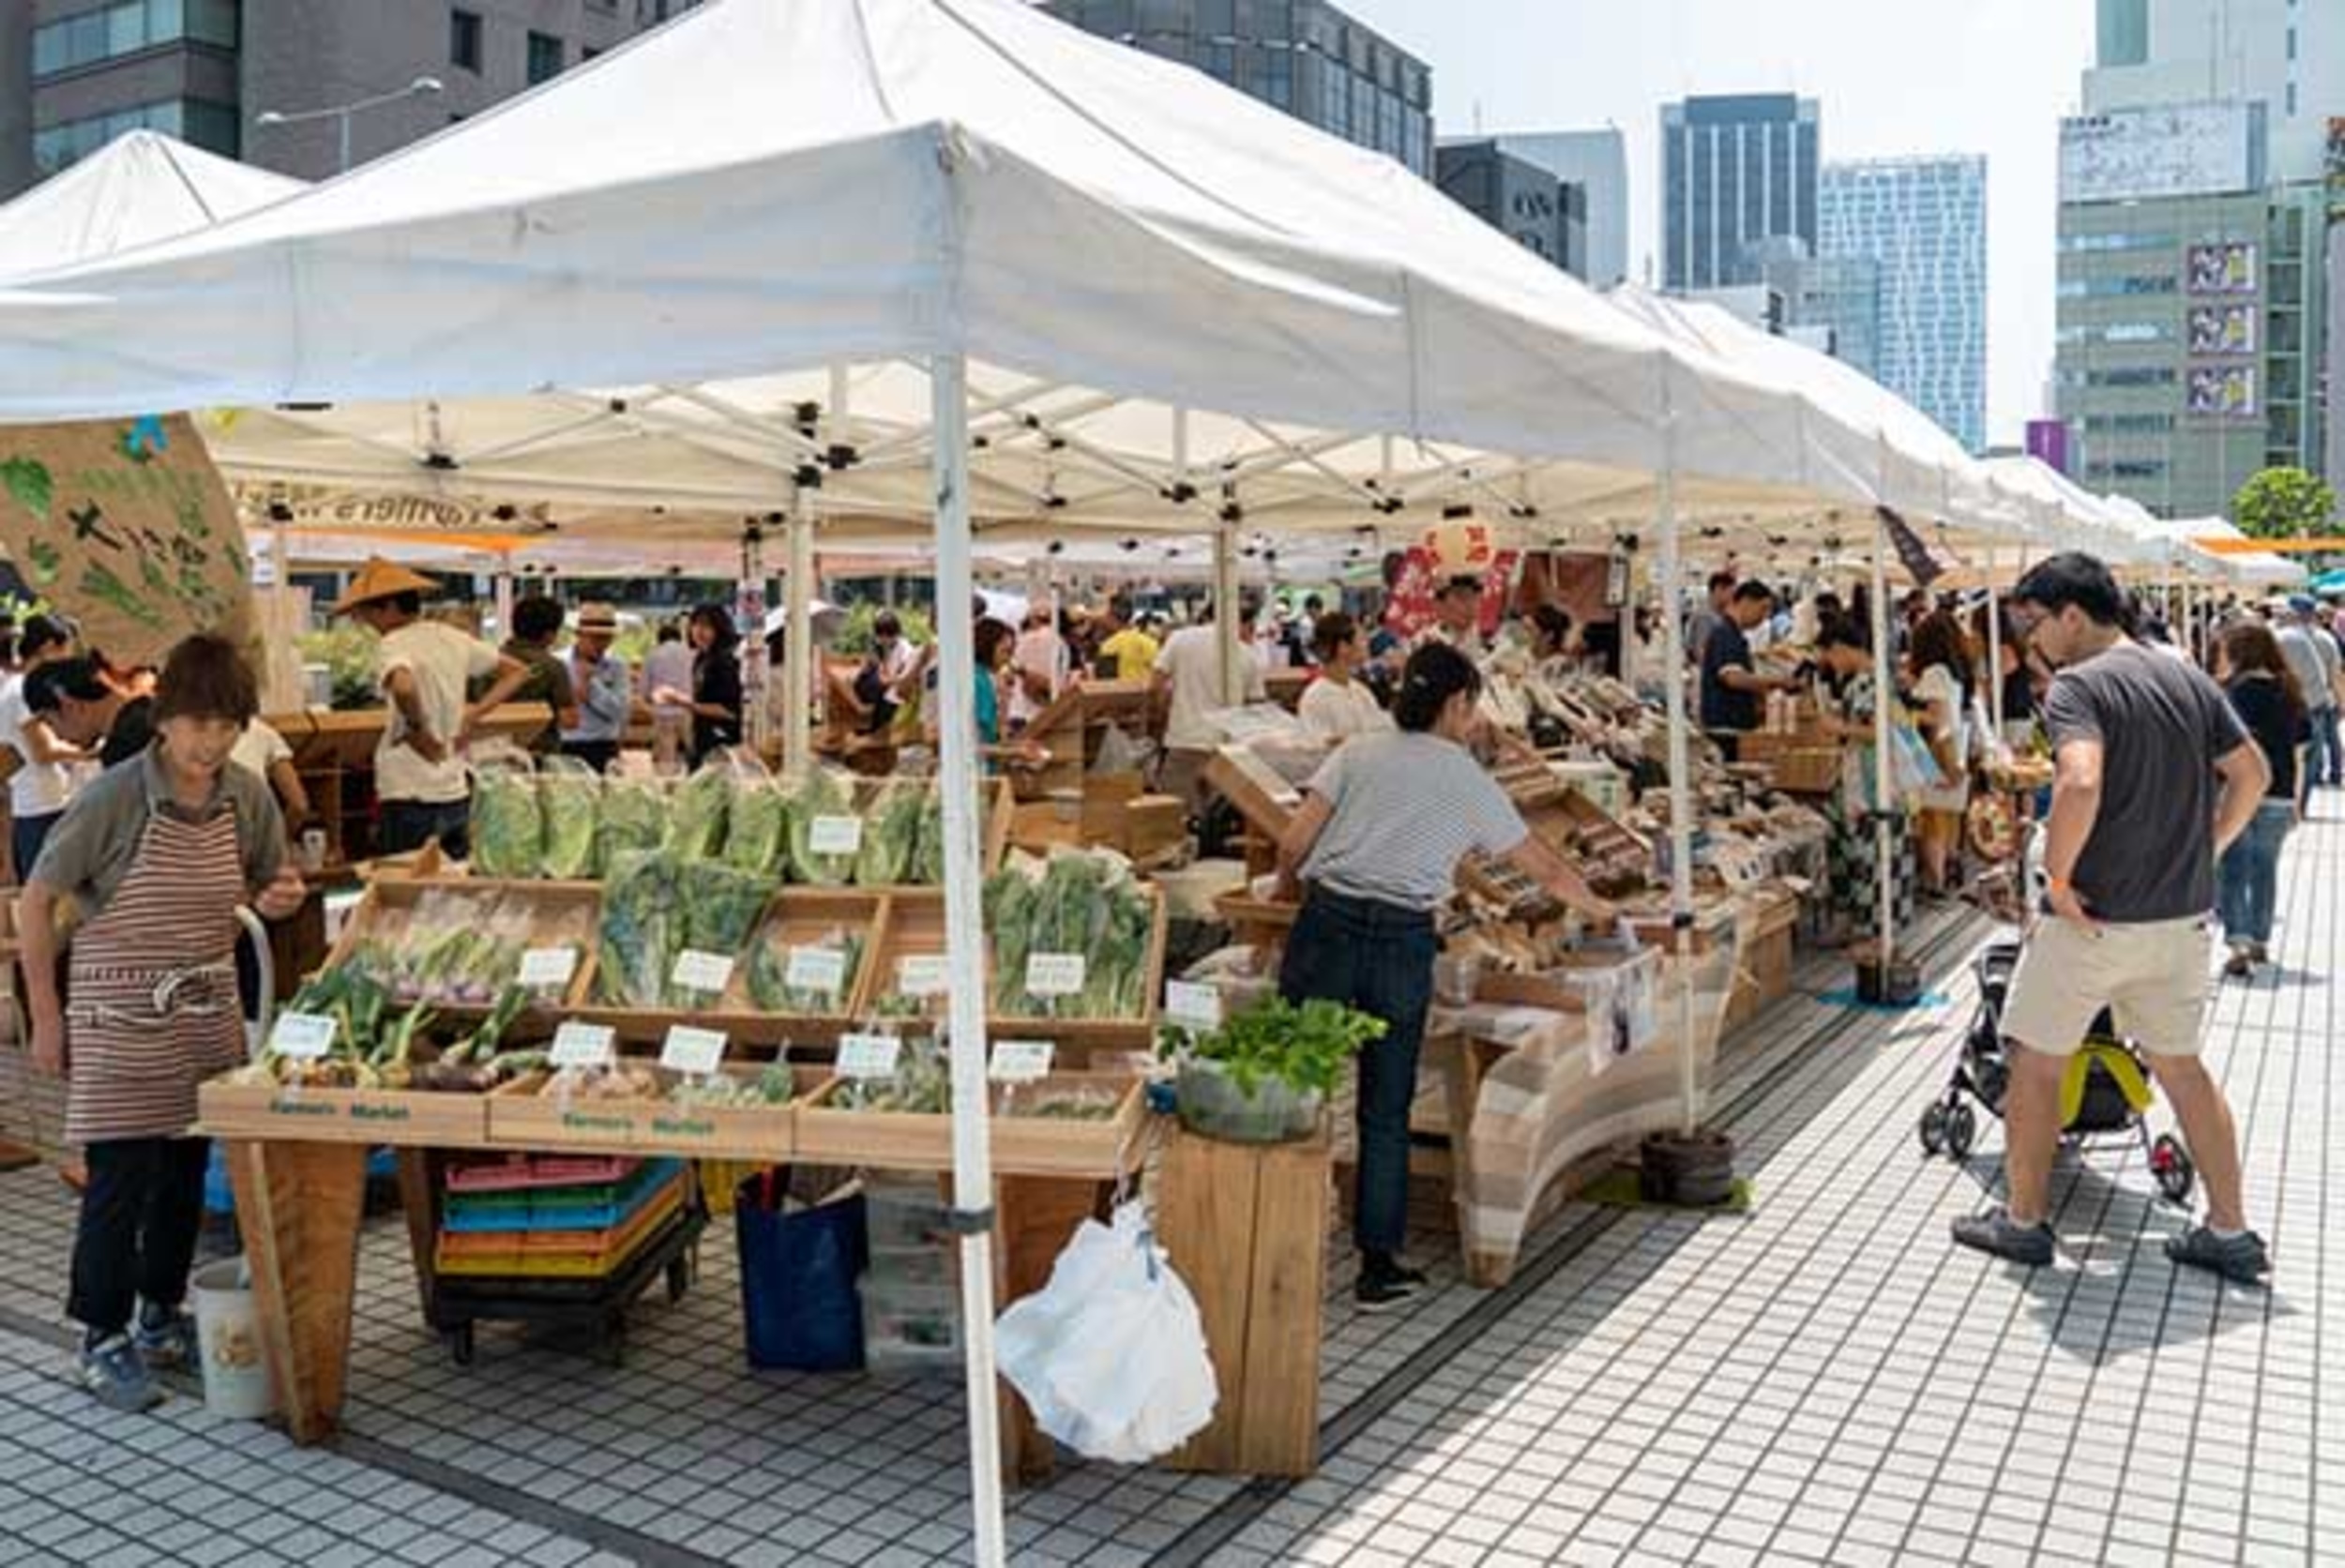 <p>Japan's farmer's market is near the world's busiest street in Shibuya but never feels overly crowded. Every weekend, farmers from across the country come out to sell their best produce. Grab a bite and then wash it down with some sake from a nearby food cart.</p><p>You may also like: <a href='https://www.yardbarker.com/lifestyle/articles/20_foods_you_didnt_know_you_can_make_on_the_grill_031224/s1__23860369'>20 foods you didn't know you can make on the grill</a></p>